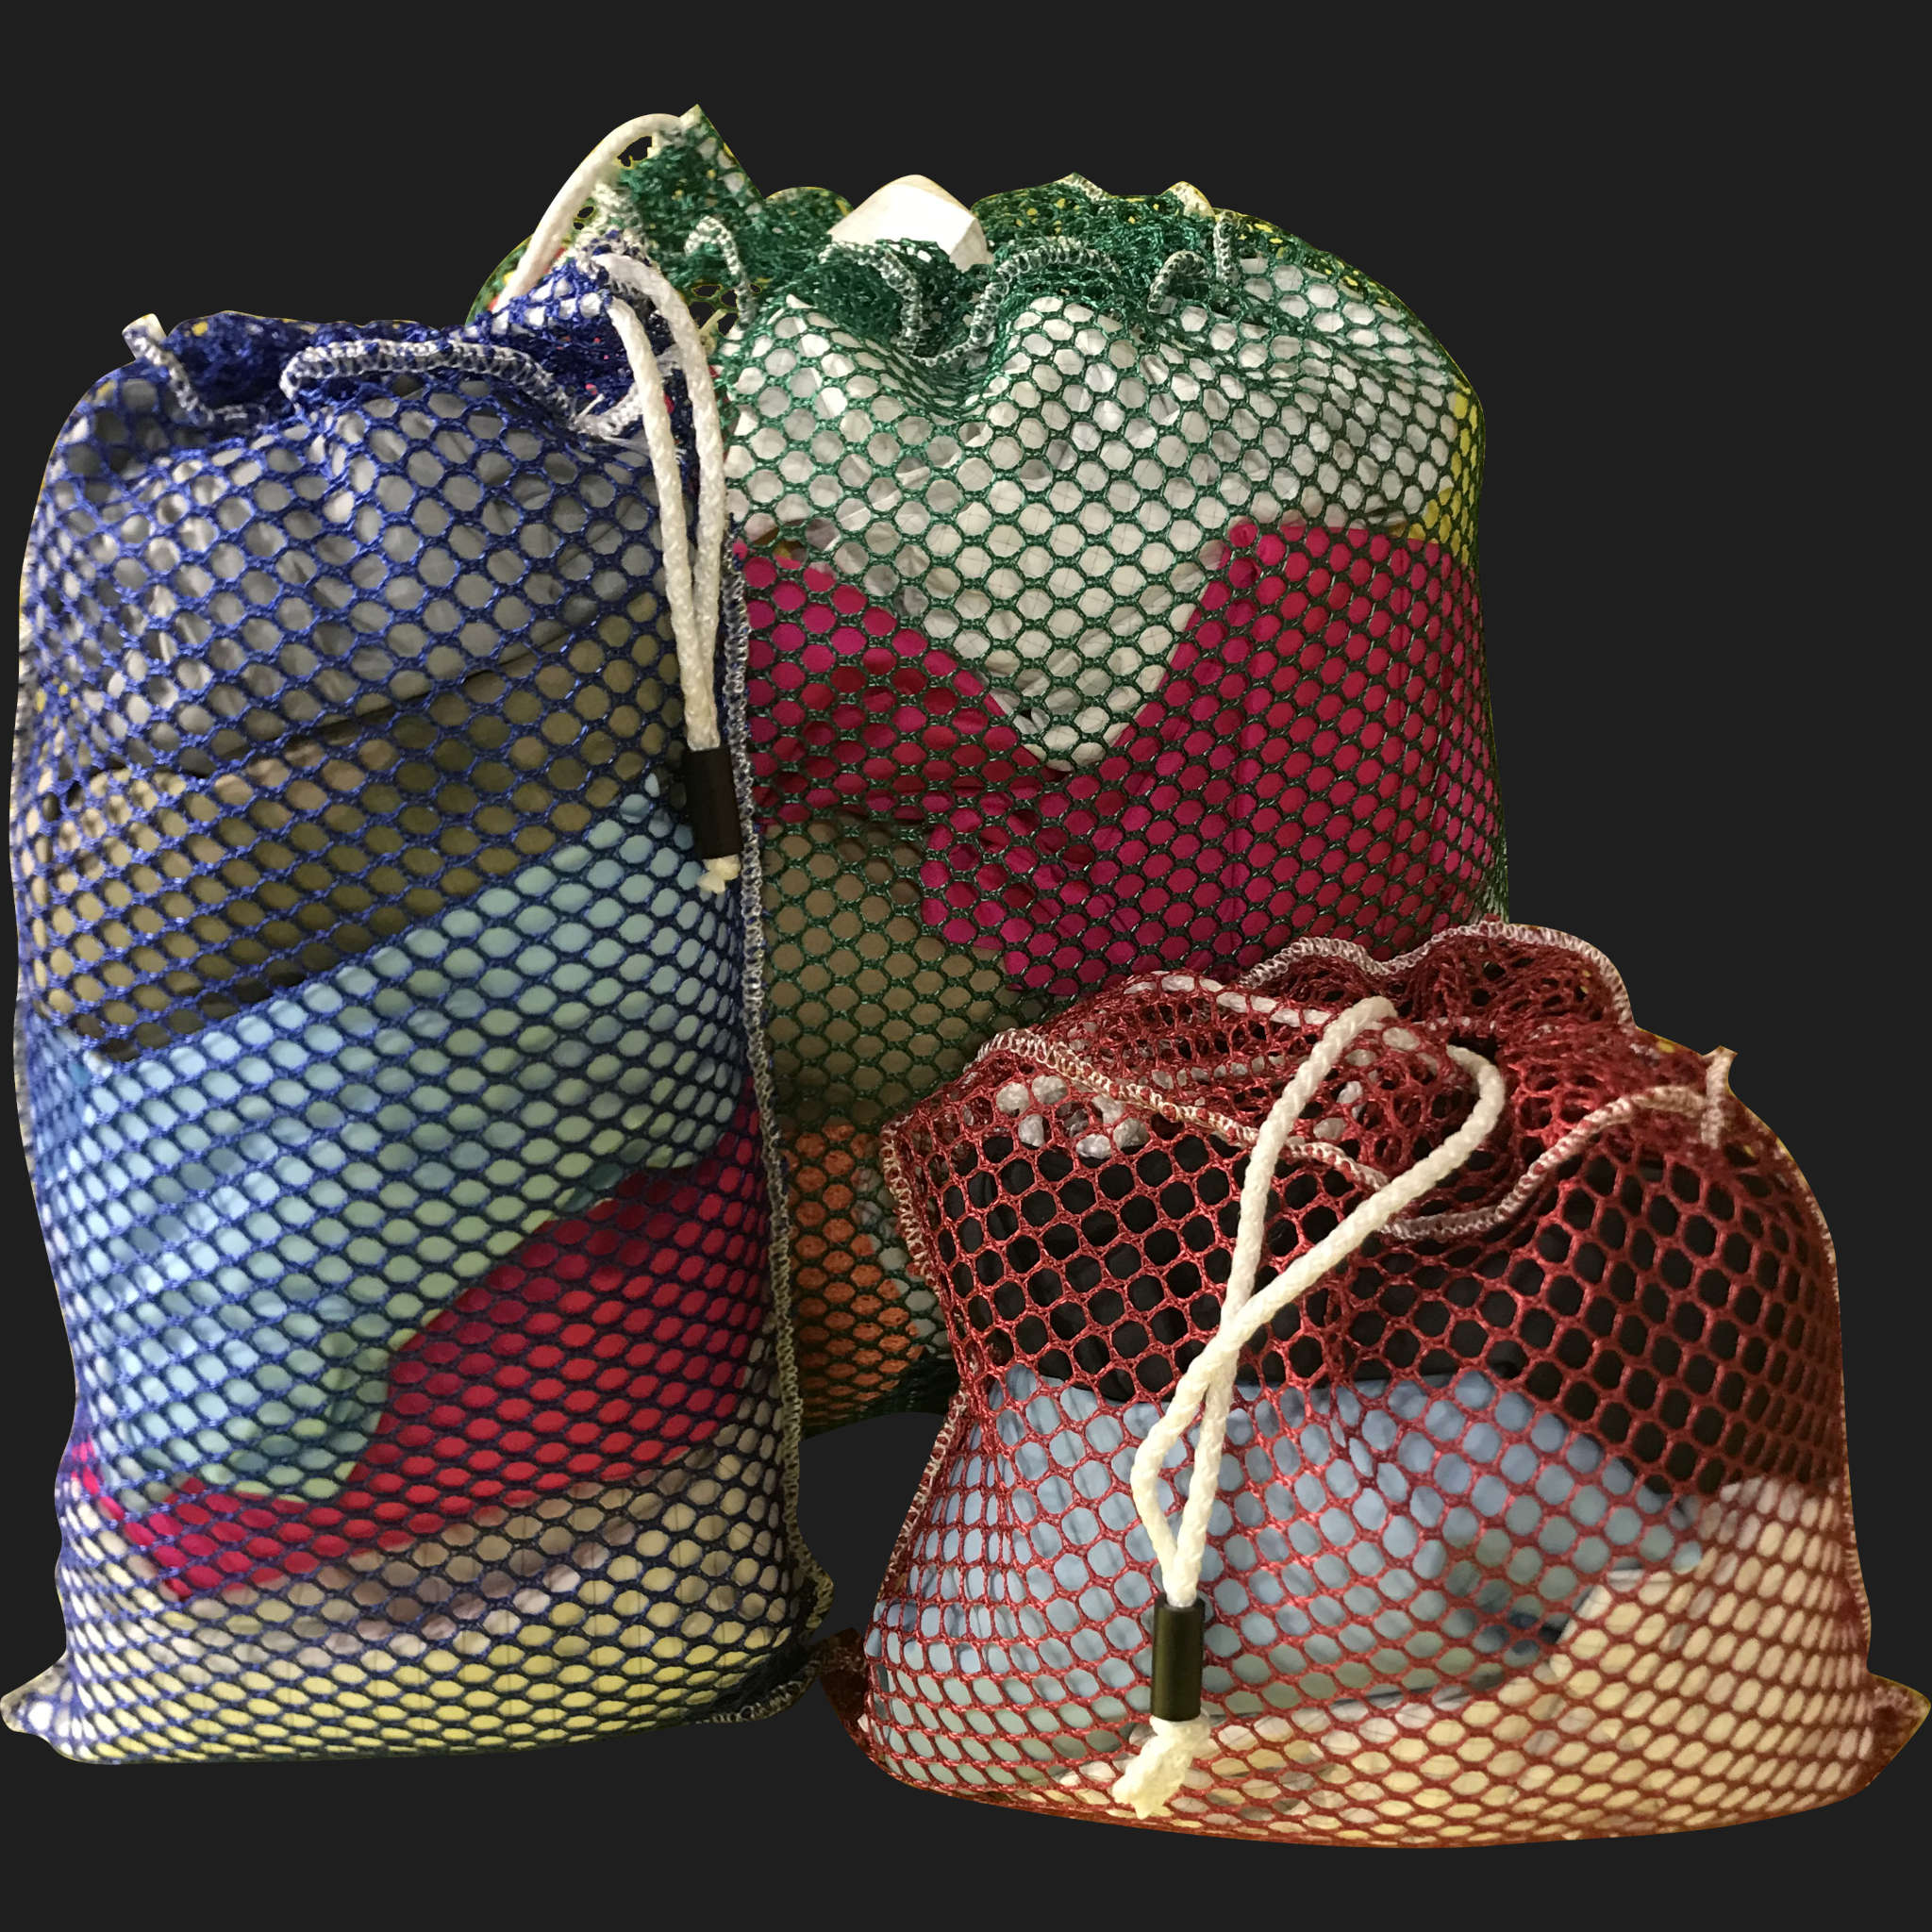 14" x 42" Customized Mesh-Net-Laundry Bags Heavy Duty with Cord and barrellock closure